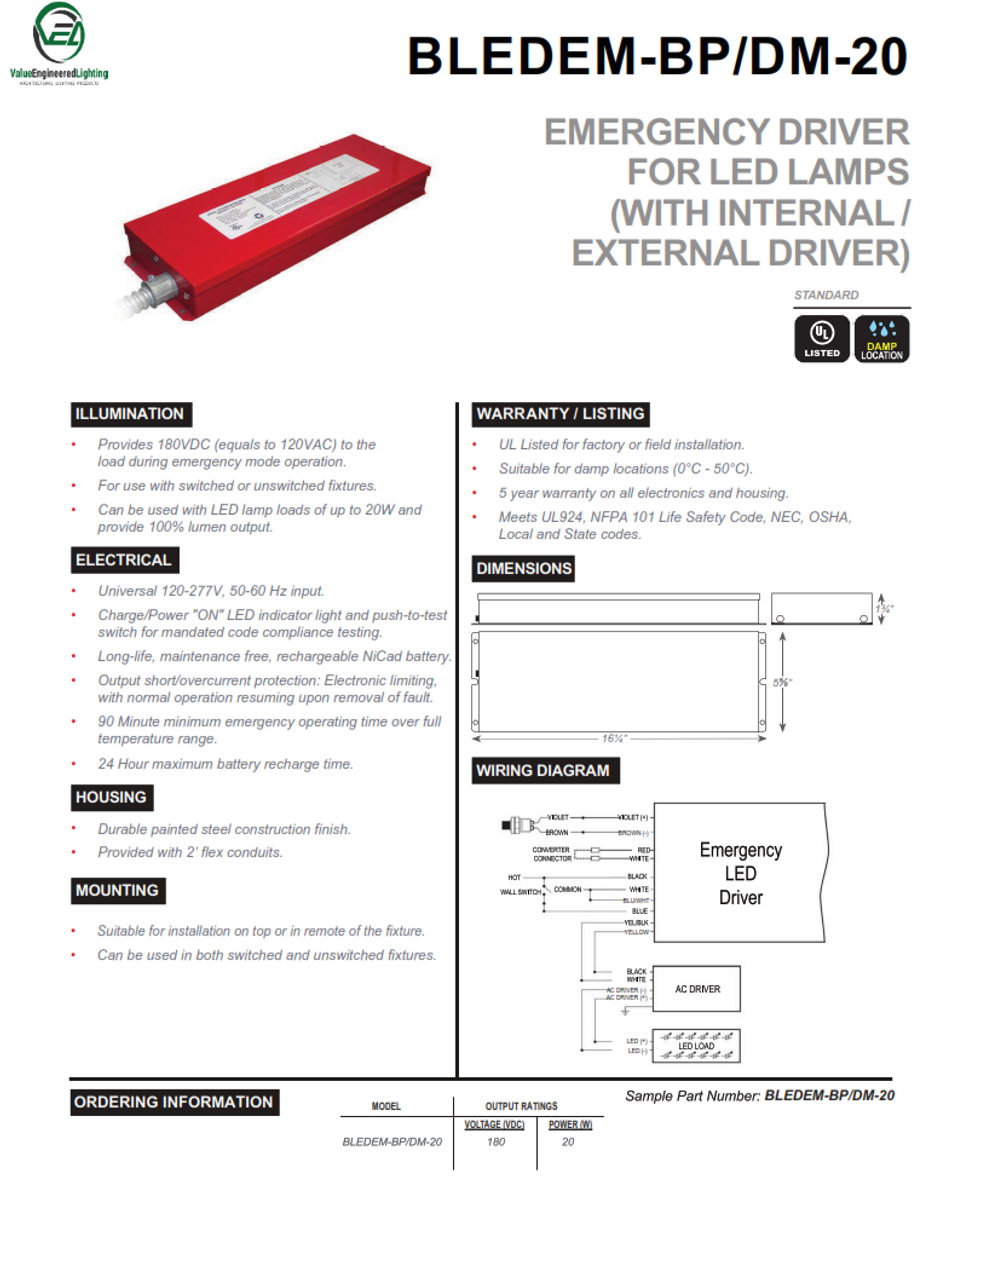 Emergency Driver for LED Lamps (With Internal/External Driver)